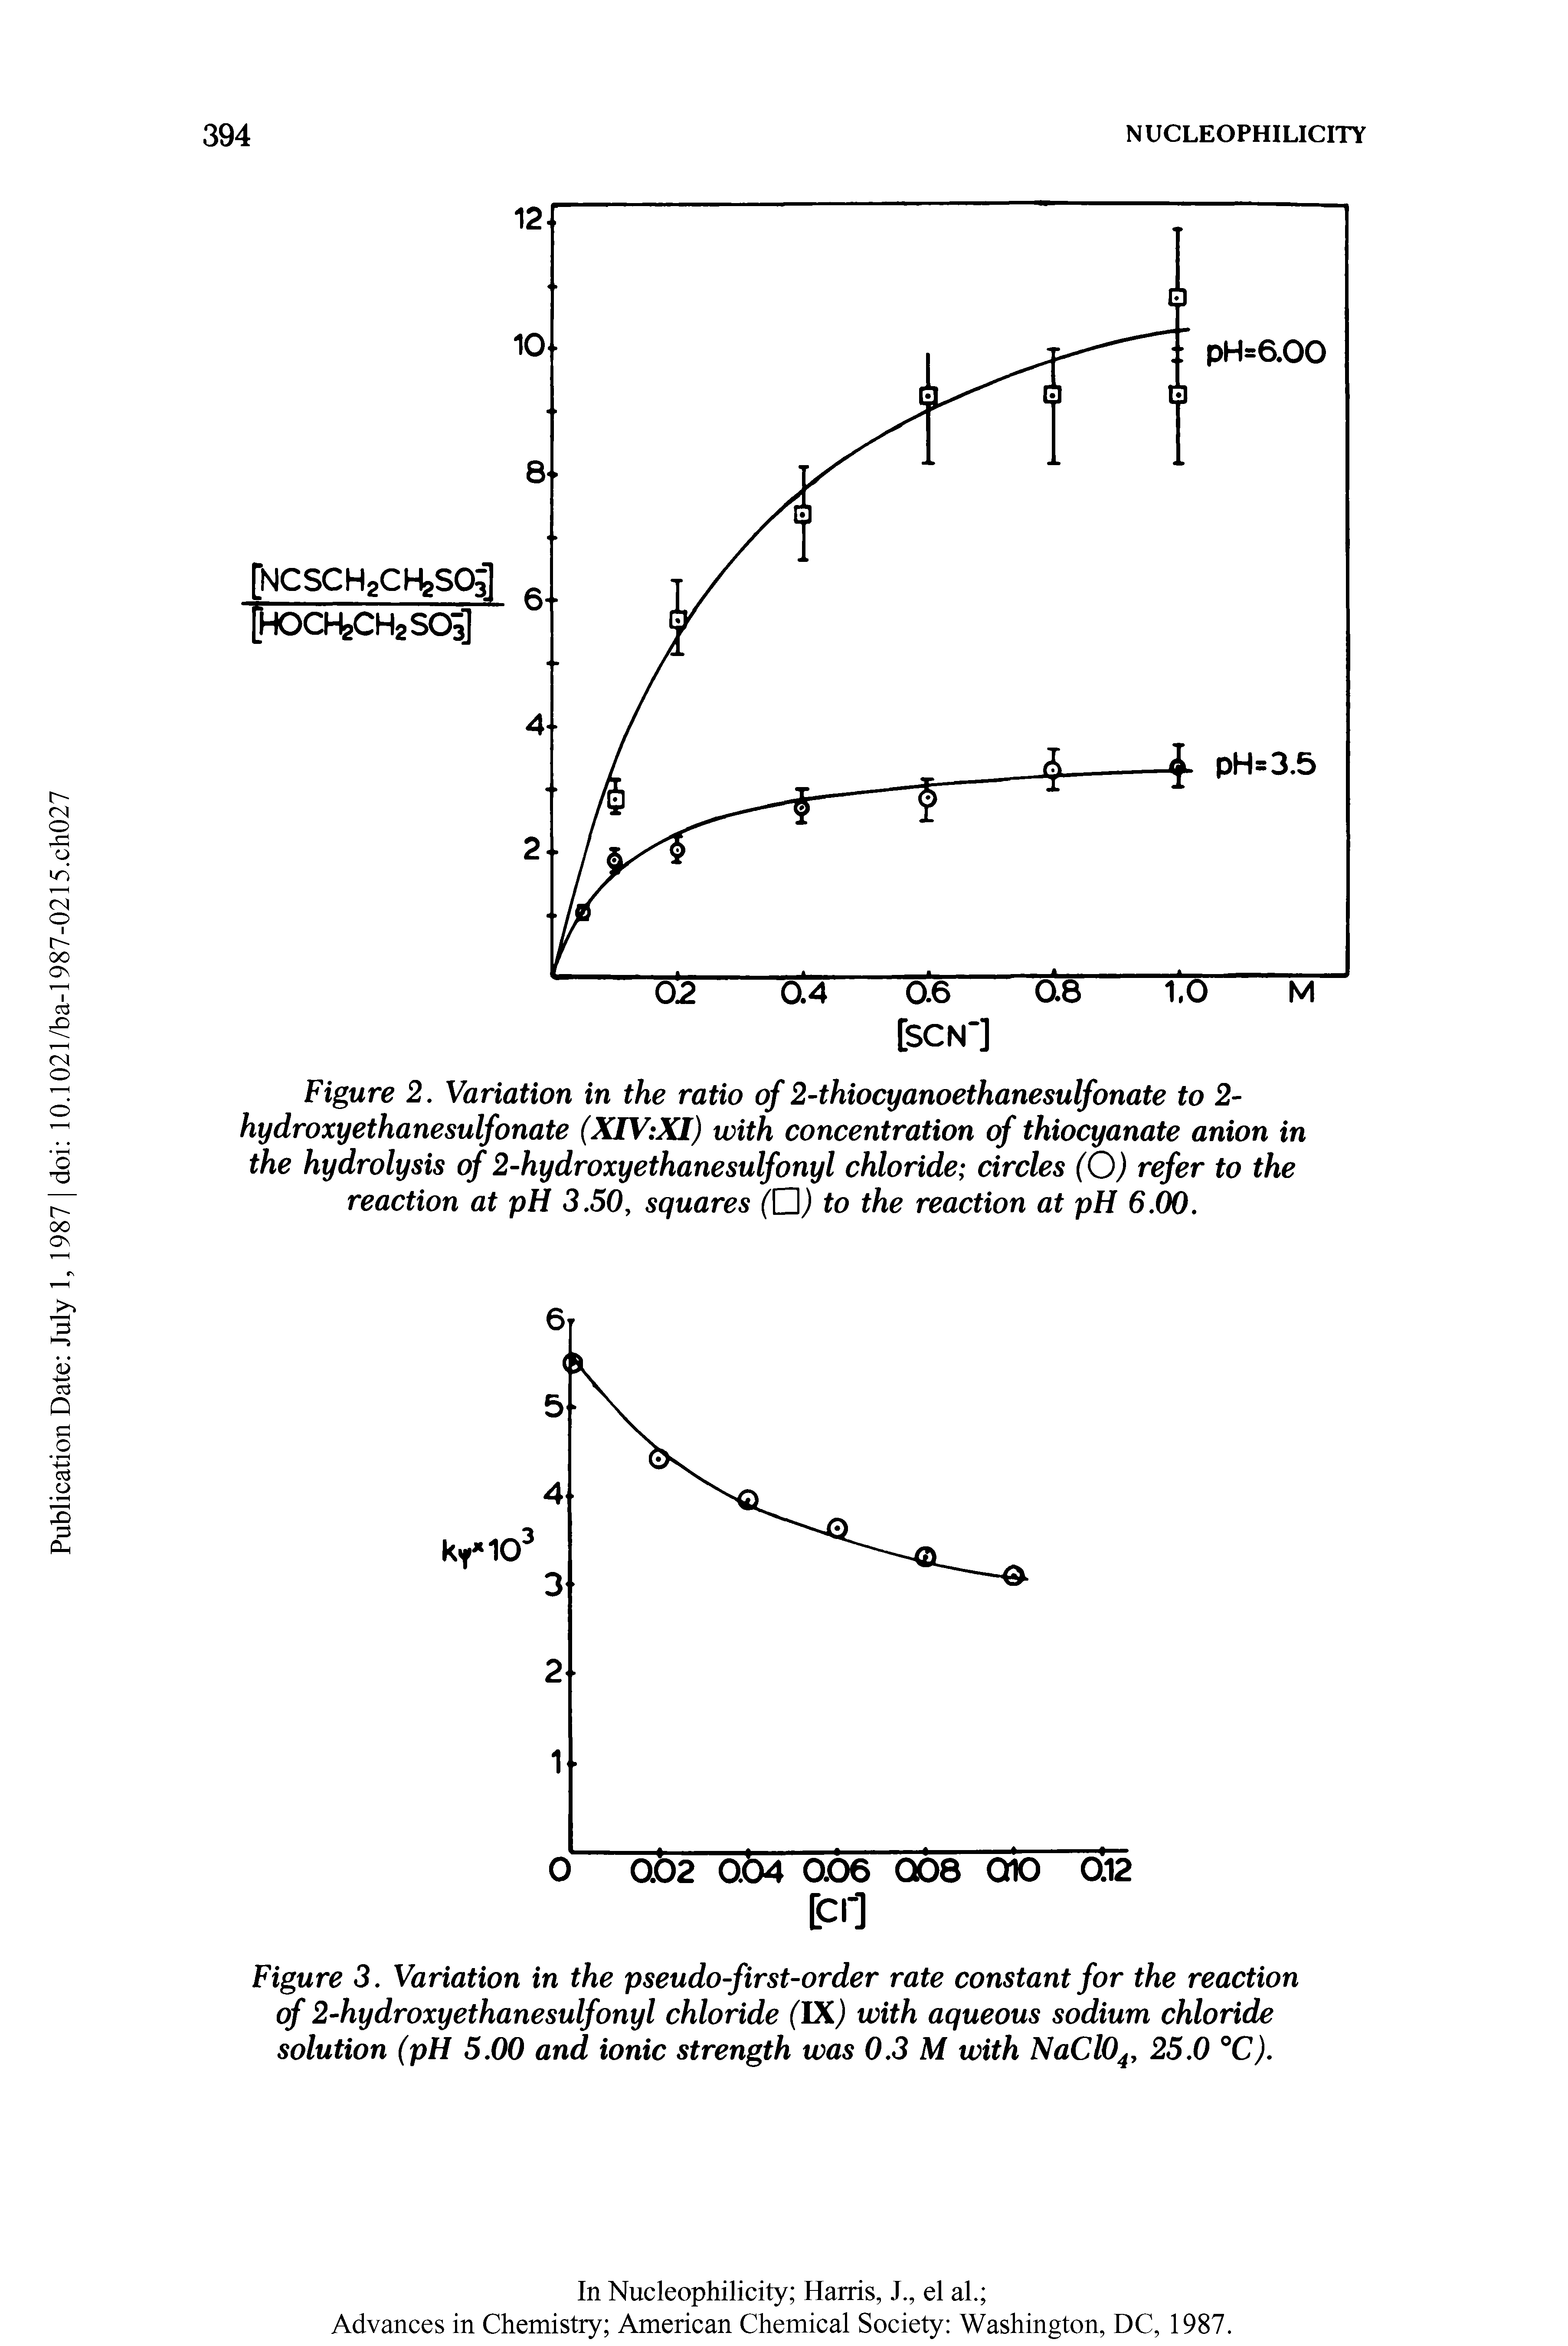 Figure 3. Variation in the pseudo-first-order rate constant for the reaction of 2-hydroxyethanesulfonyl chloride (IX) with aqueous sodium chloride solution (pH 5.00 and ionic strength was 0.3 M with NaCl04, 25.0 °C).